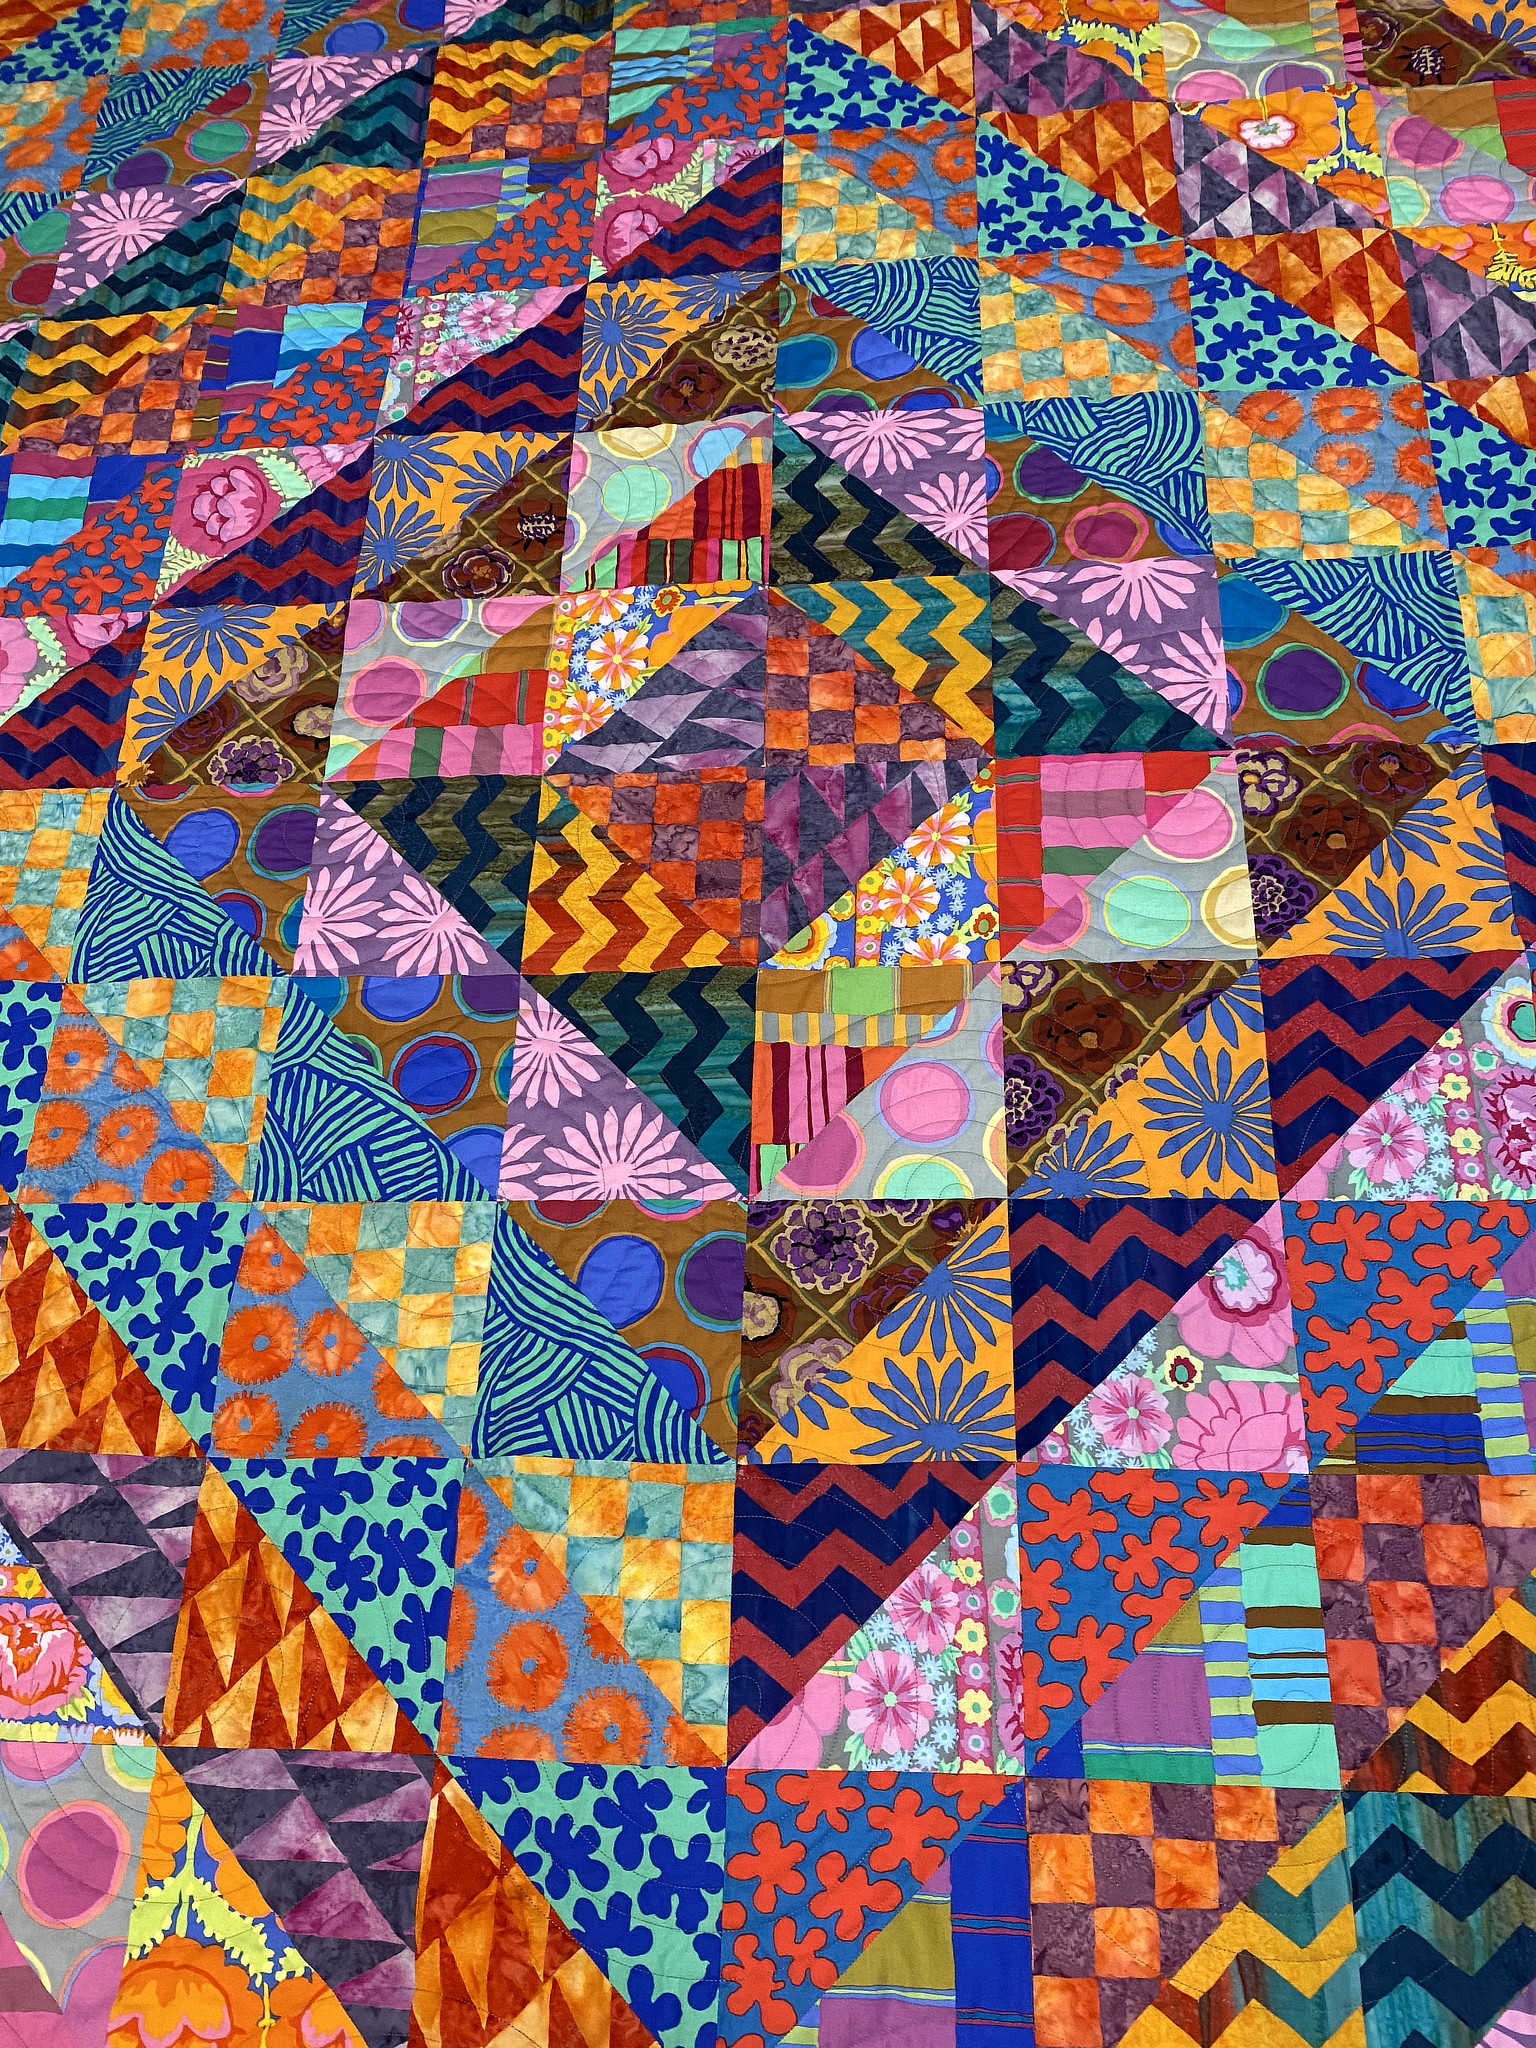 Terrie’s Abstract Squares Quilt